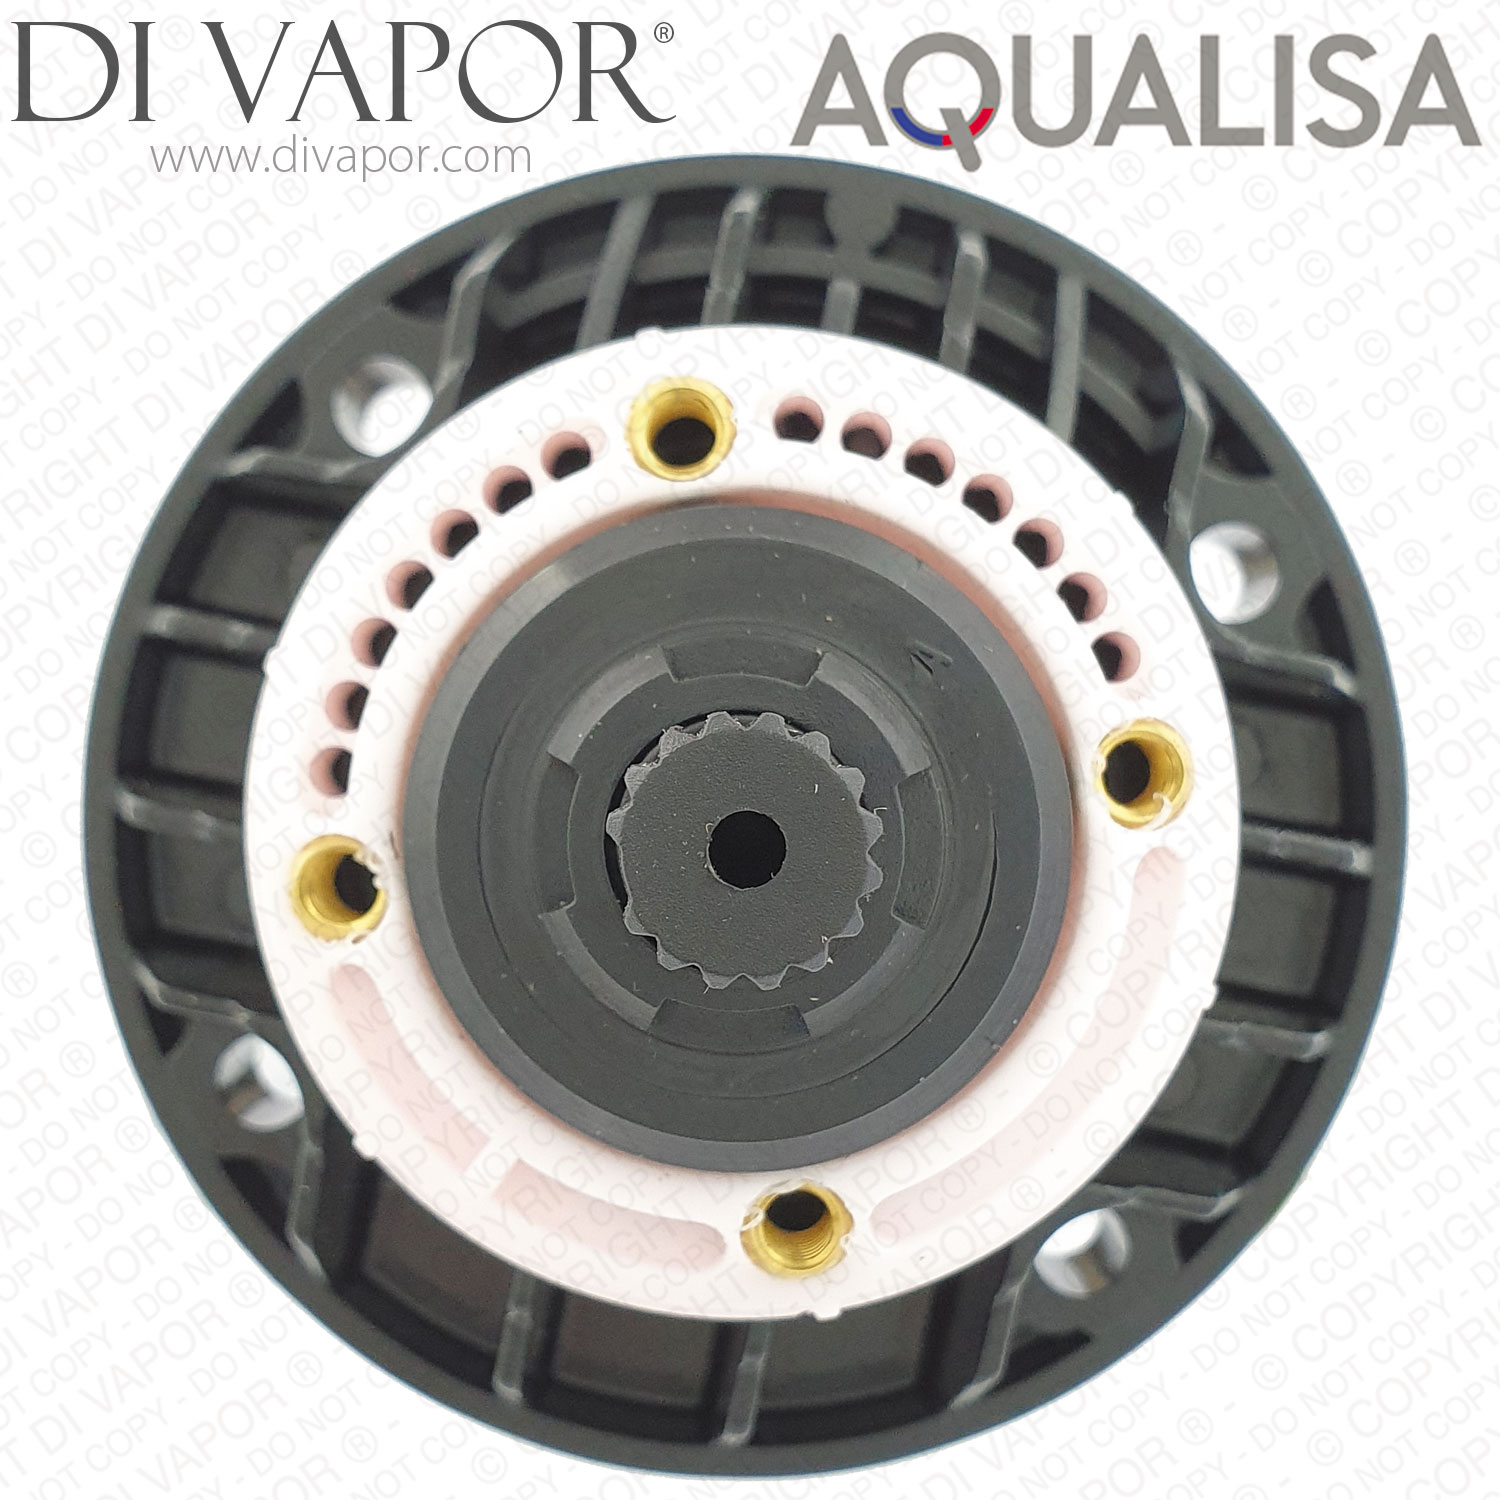 Aqualisa Shower Washer Seal Gasket with Mesh Spare Part 609 